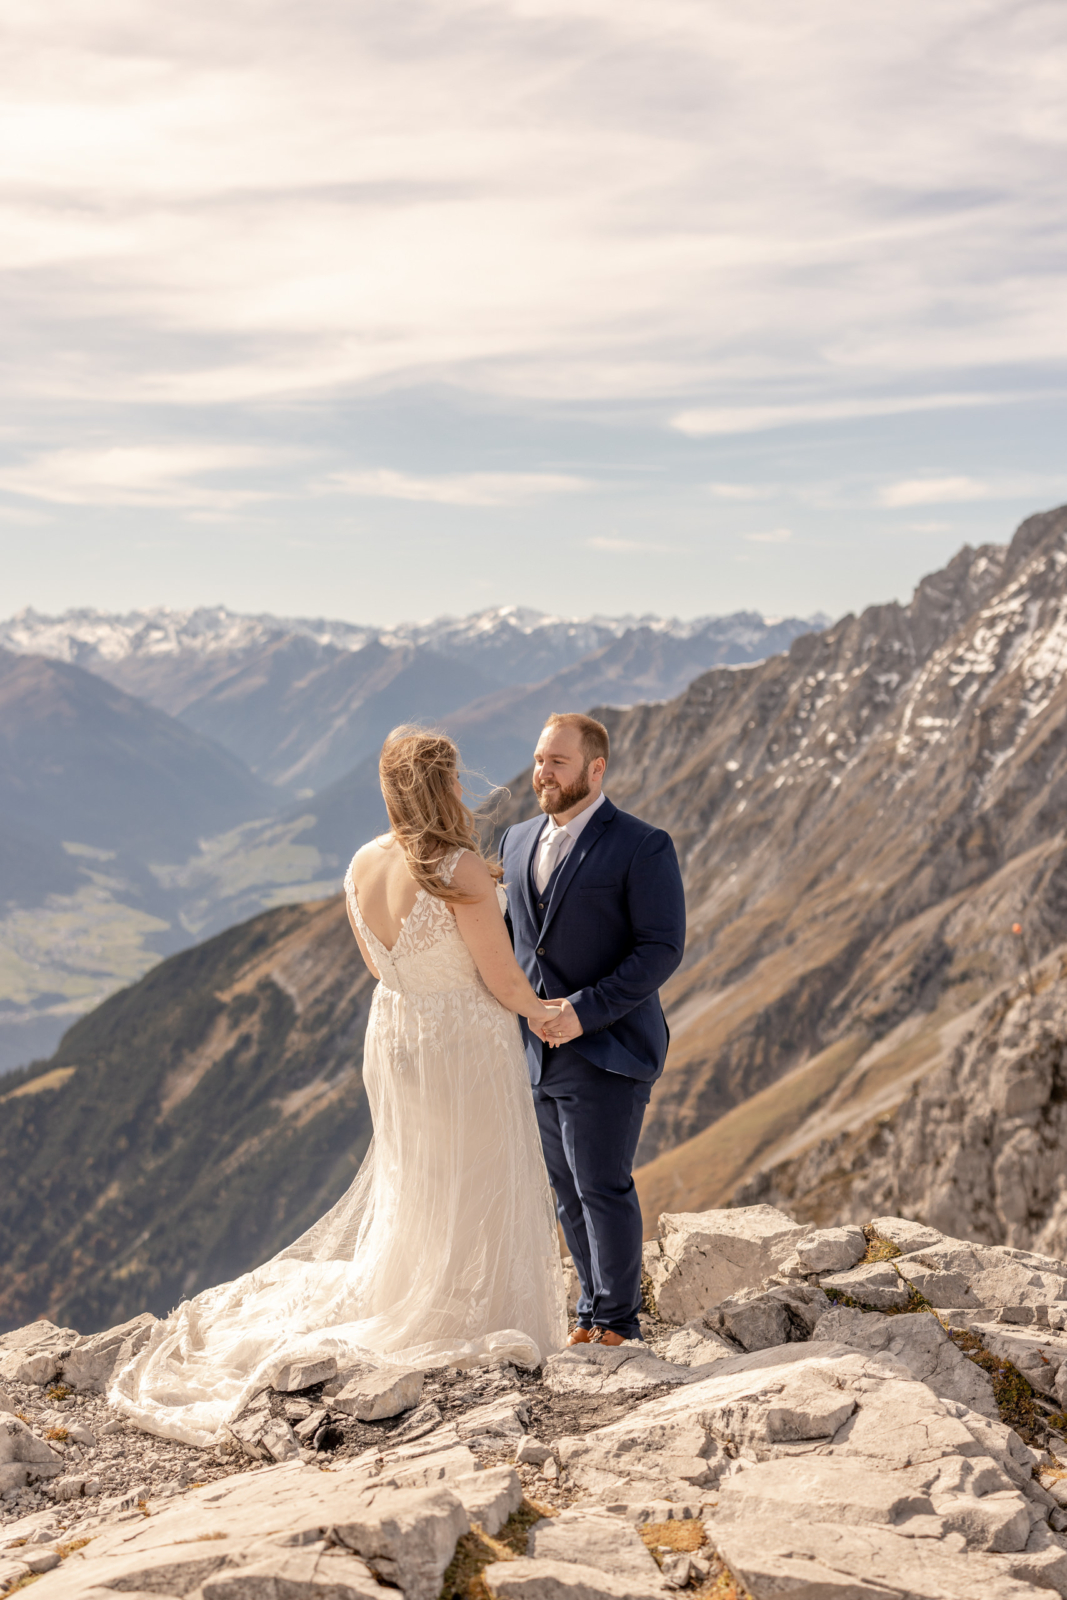 Elopement Wedding in the Mountains in Tyrol